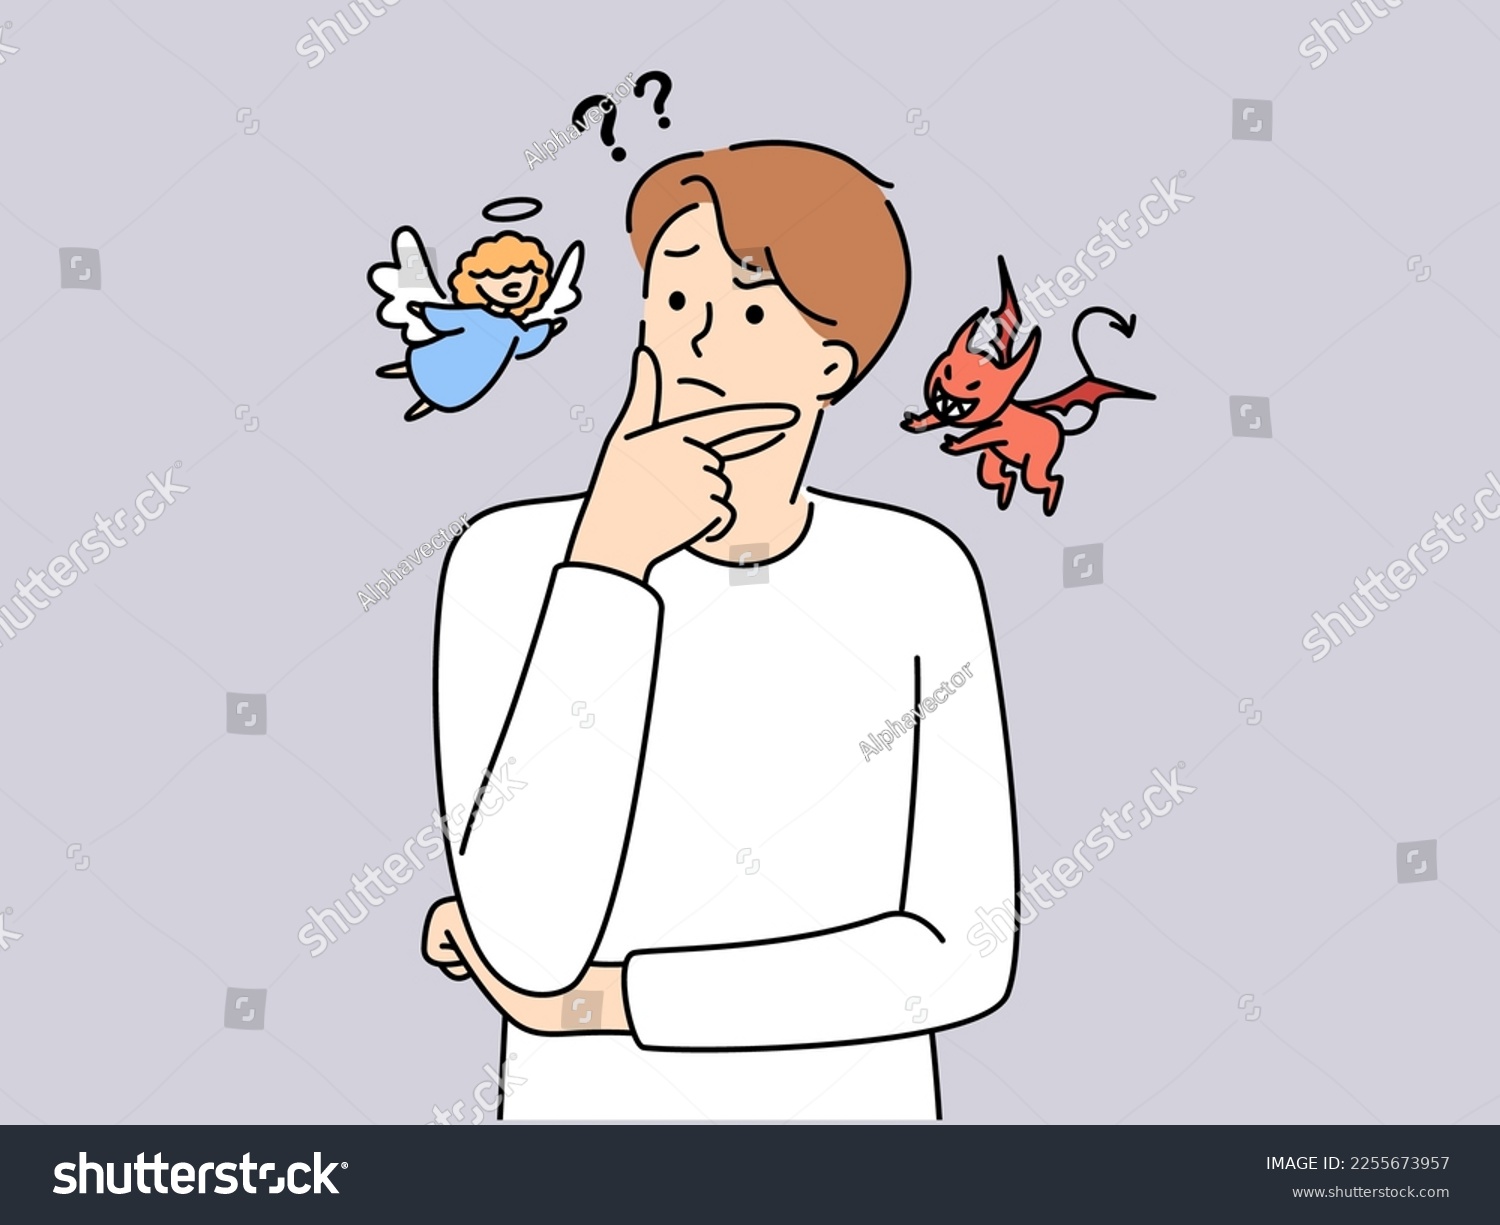 SVG of Confused young man with devil and angel on different sides decide or think. Frustrated guy feel unsure and doubtful about getting right or wrong decision. Vector illustration. svg